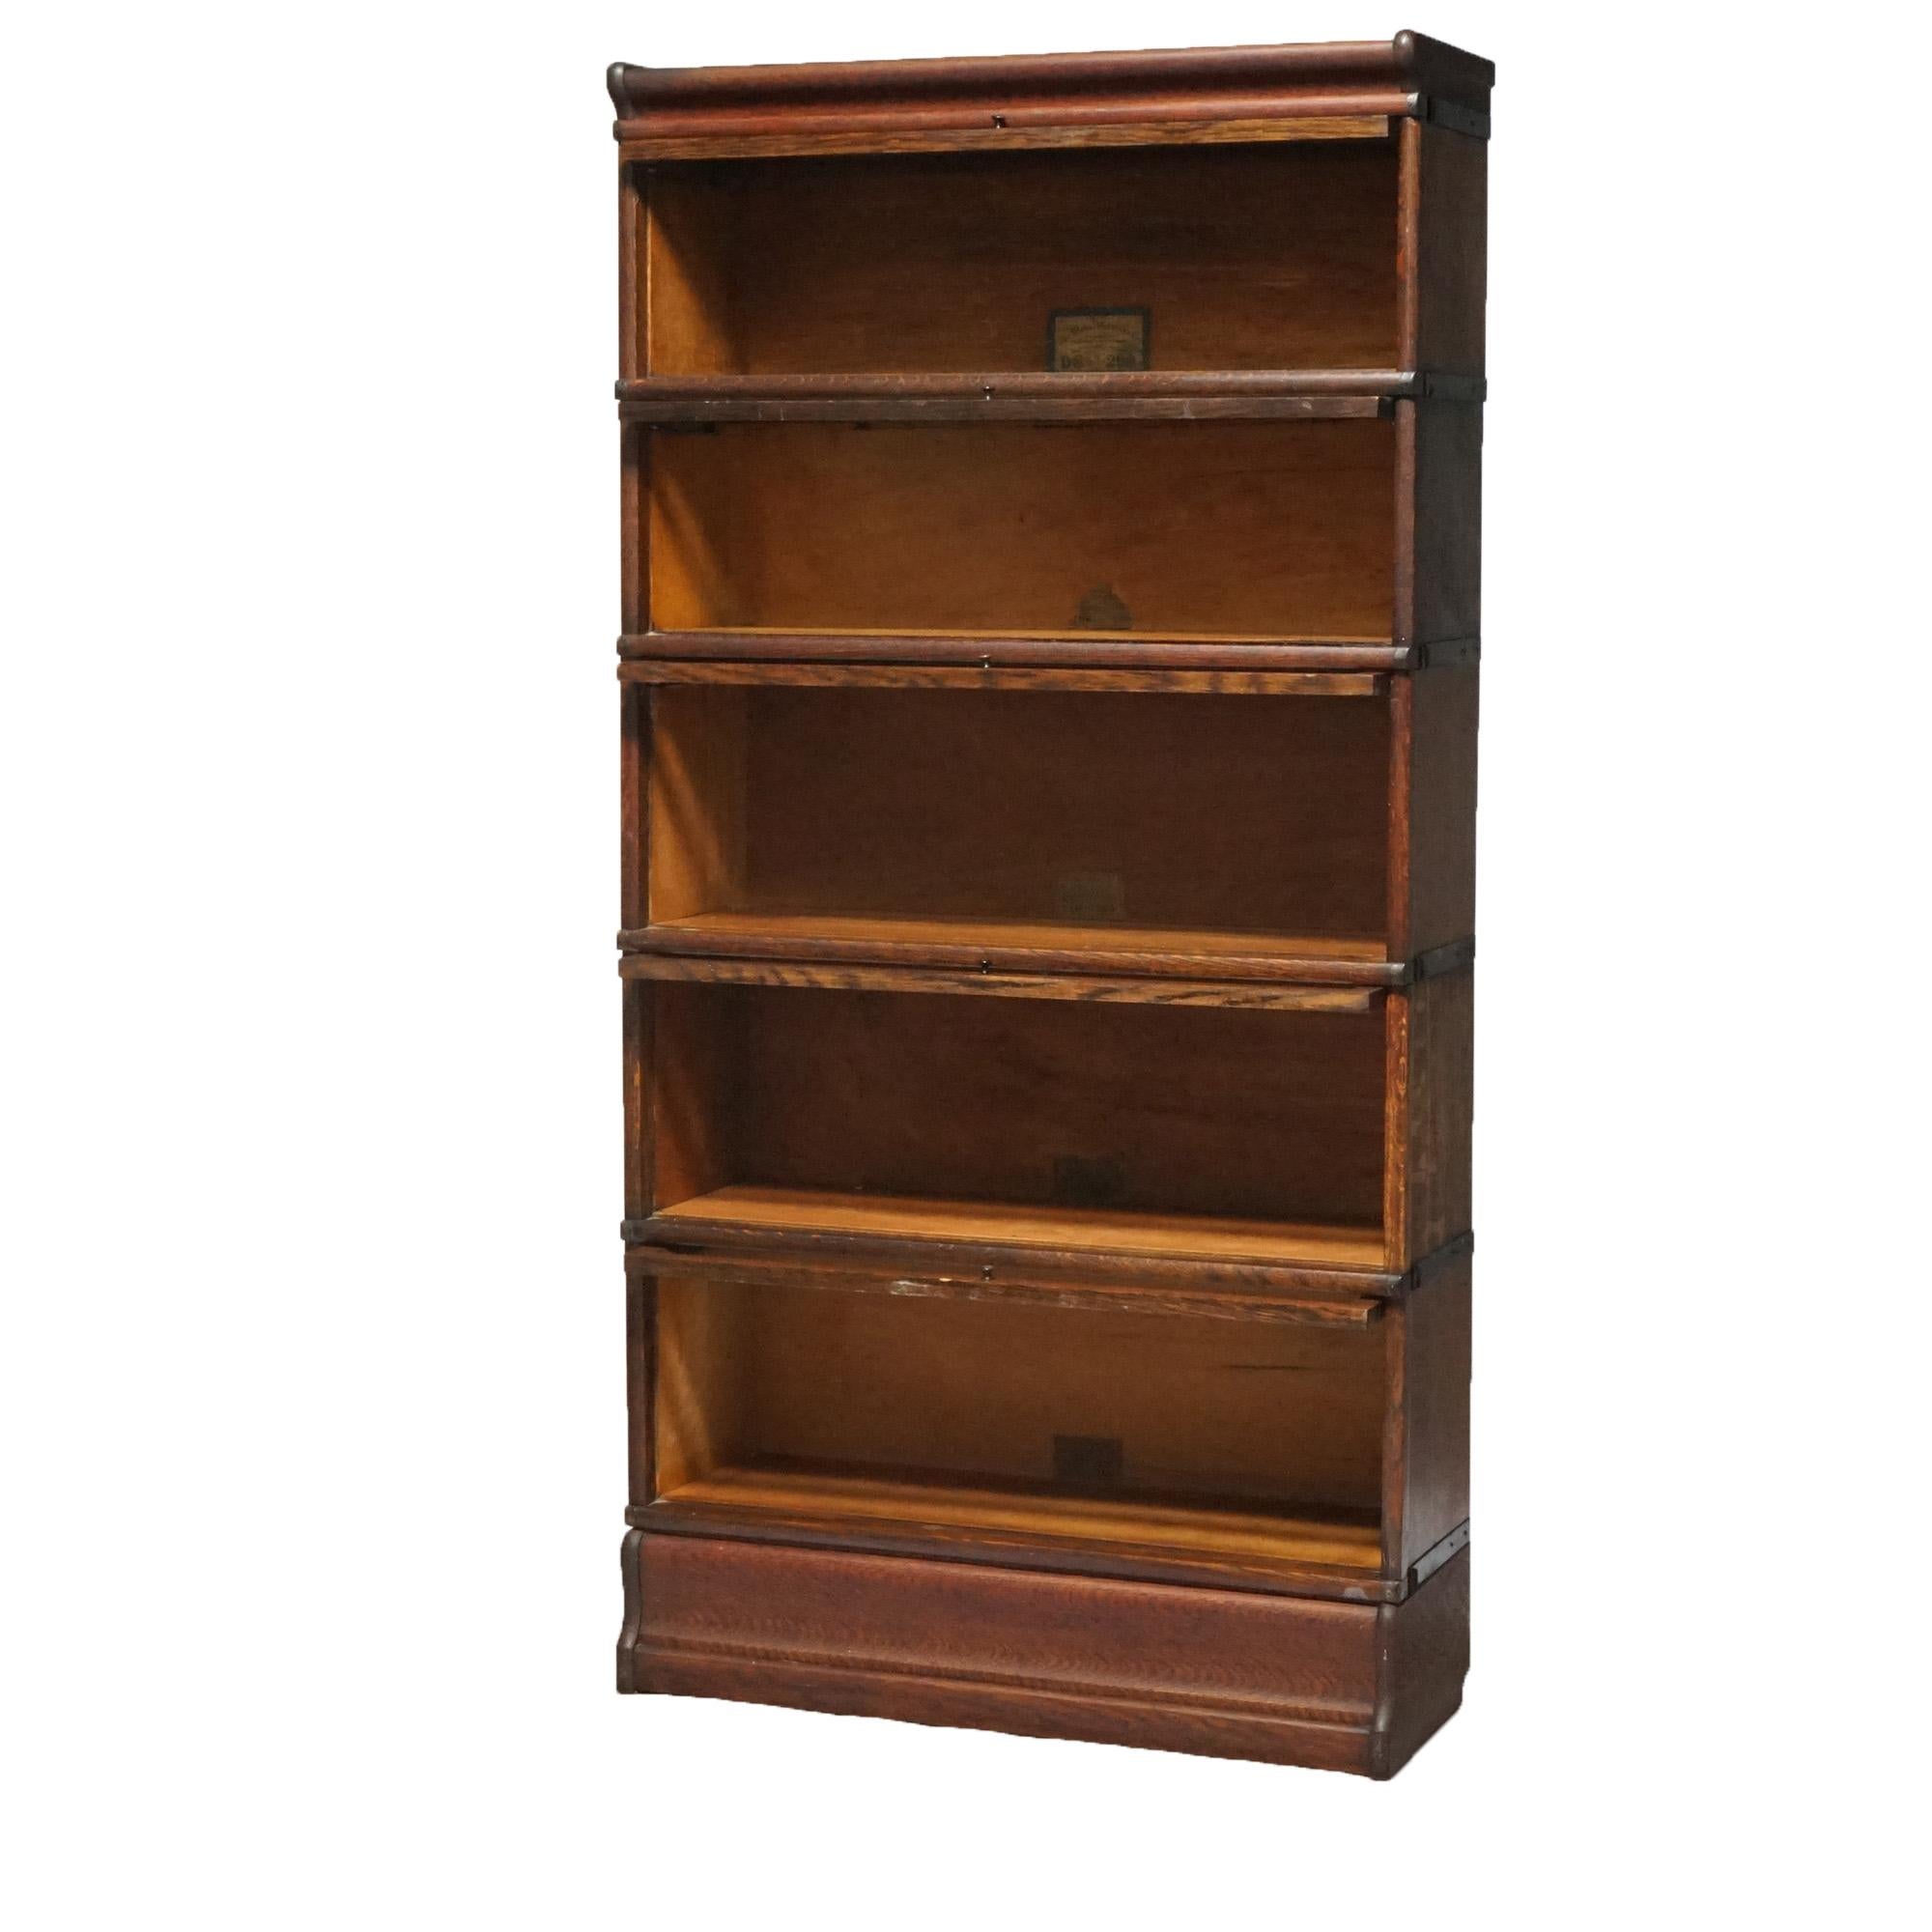 An antique Arts and Crafts Mission barrister bookcase by Globe Wernicke offers quarter sawn oak construction with five stacks each having slide out doors and seated on ogee base, maker label as photographed, c1910

Measures - 68.25'' H x 34'' W x